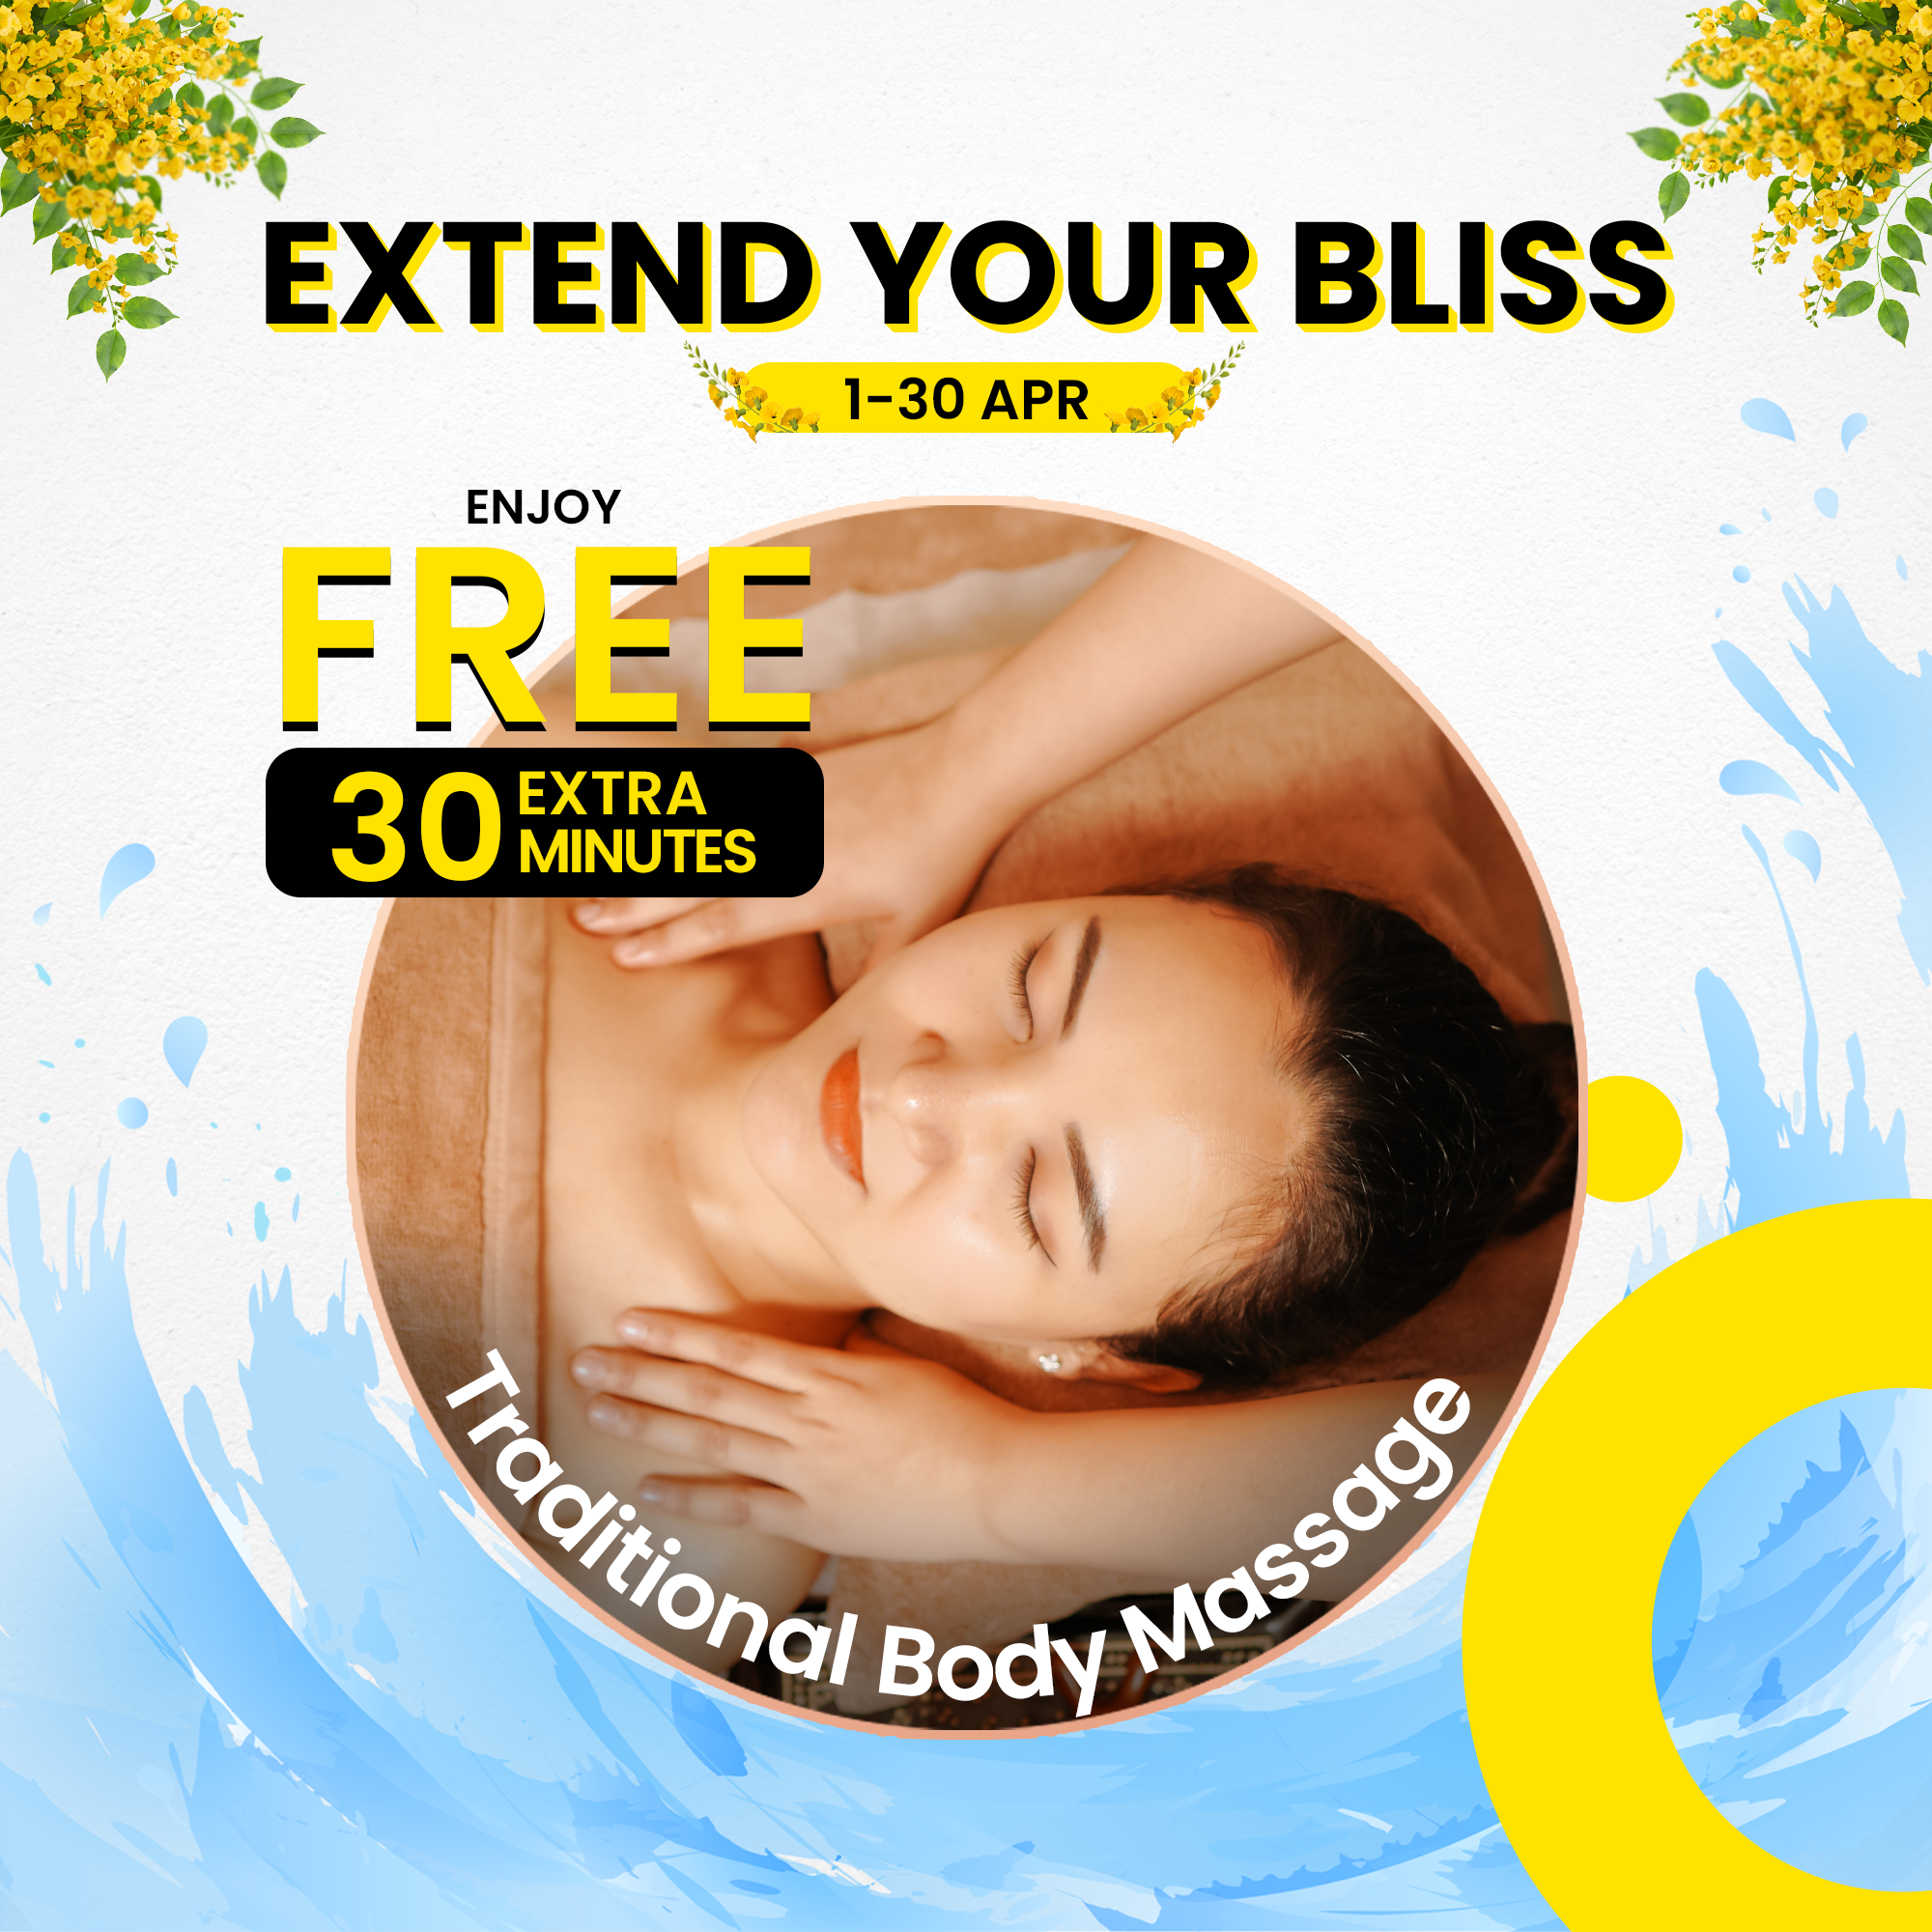 Extend Your Bliss ( Traditional Body Massage)